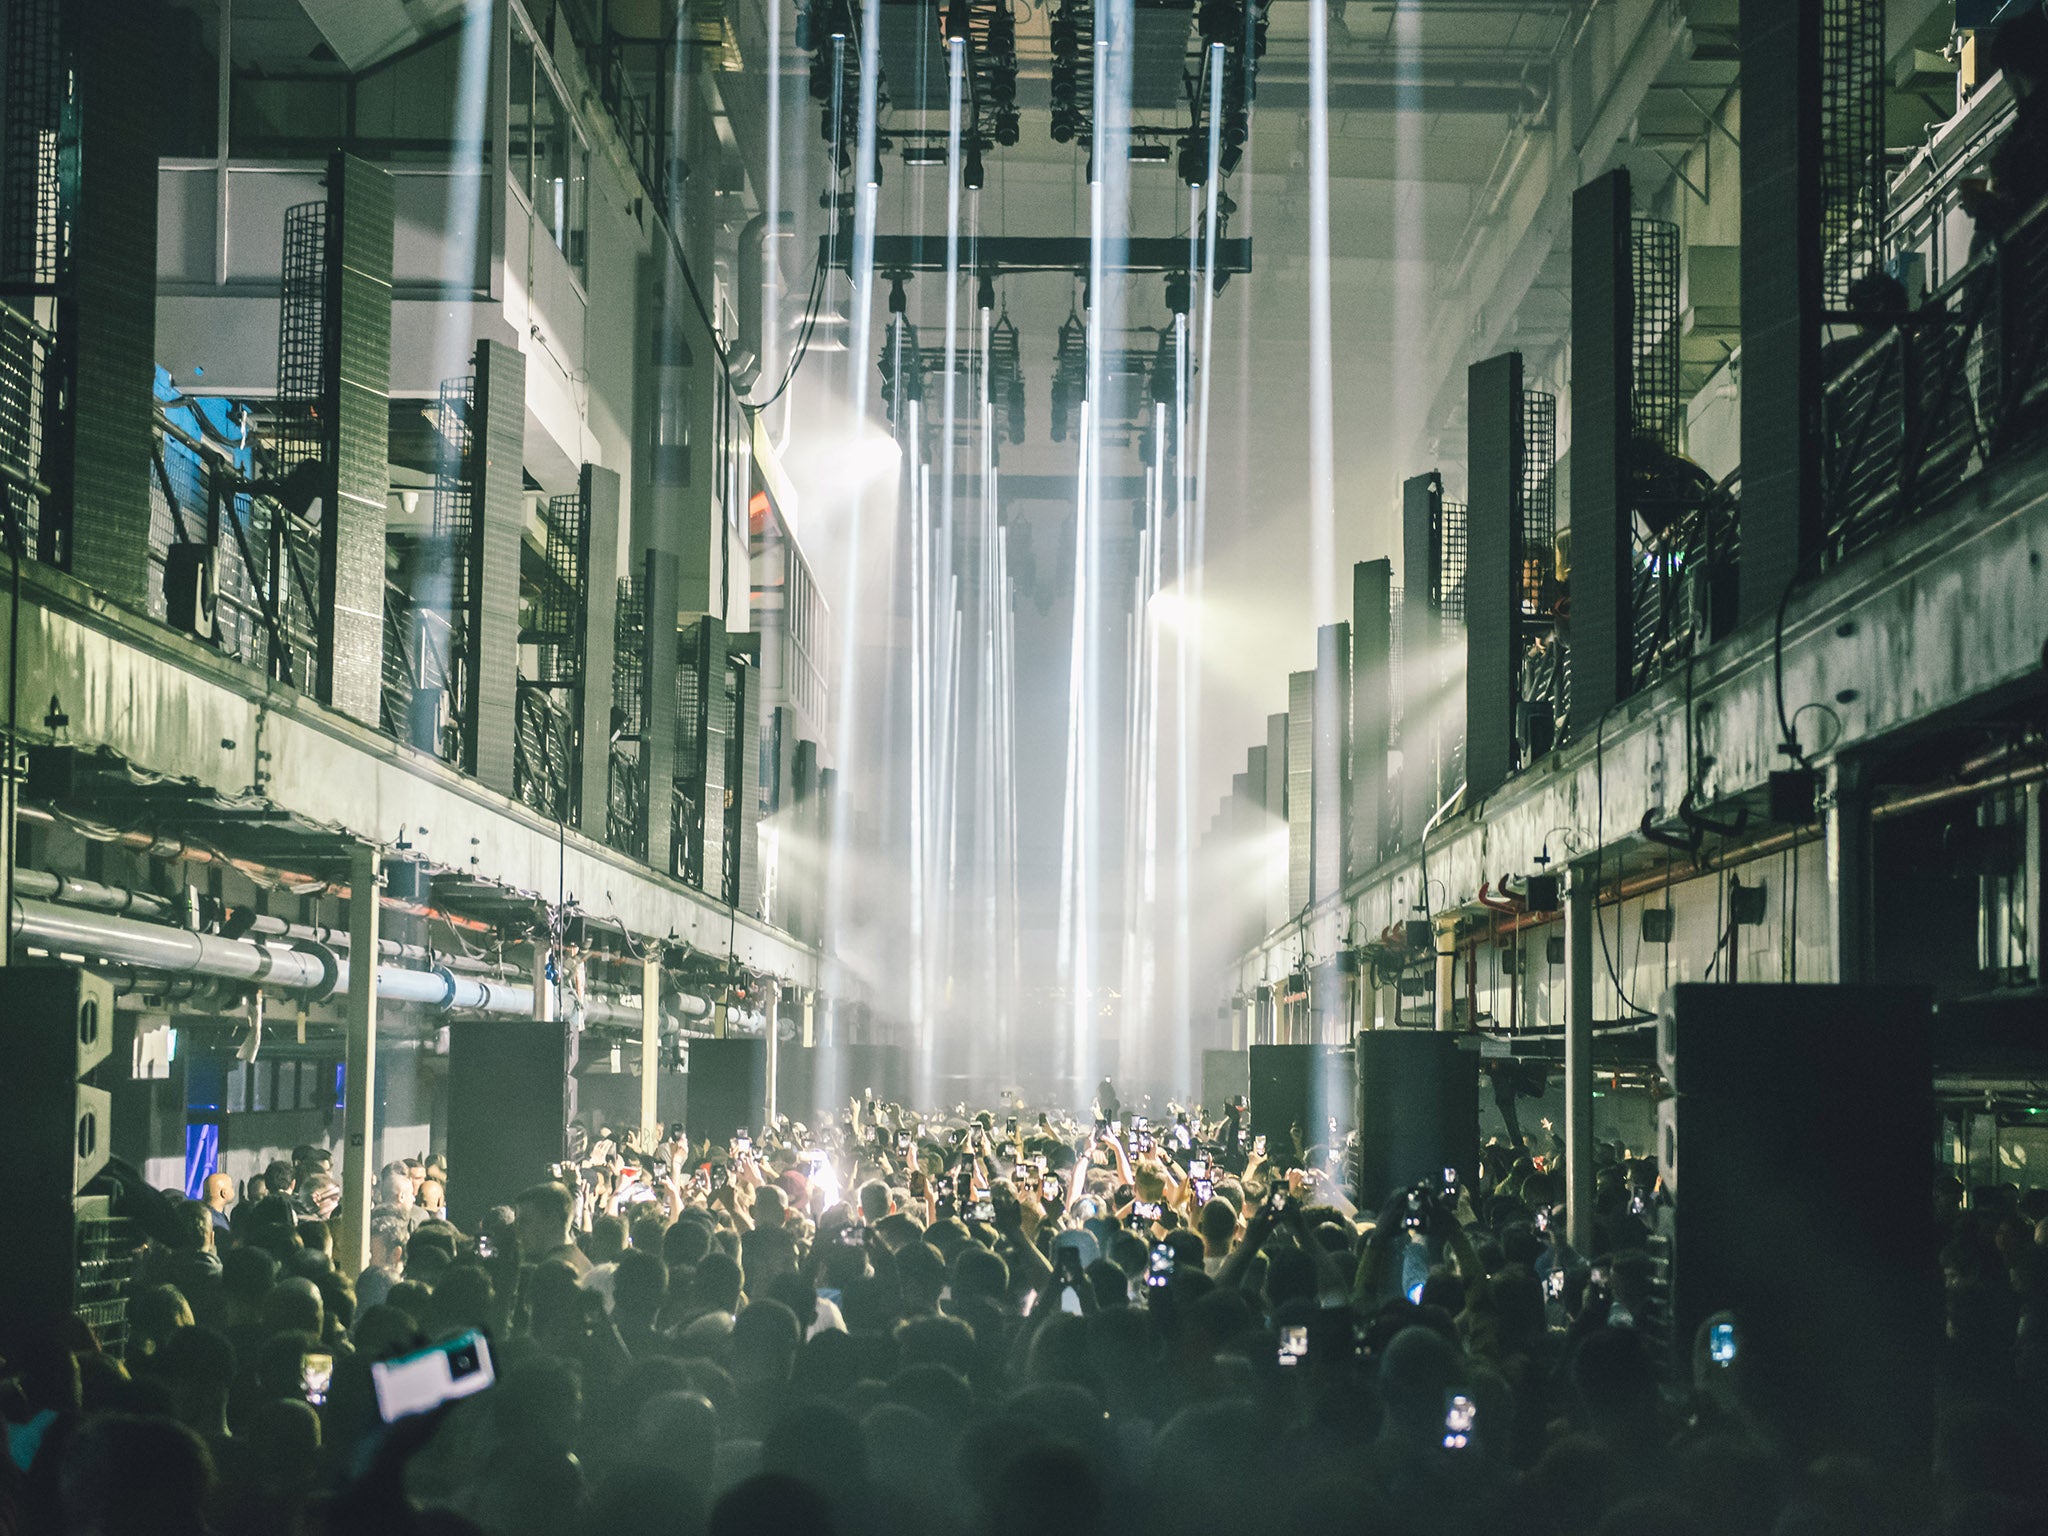 Printworks has become the perfect example of managing regeneration without gentrification